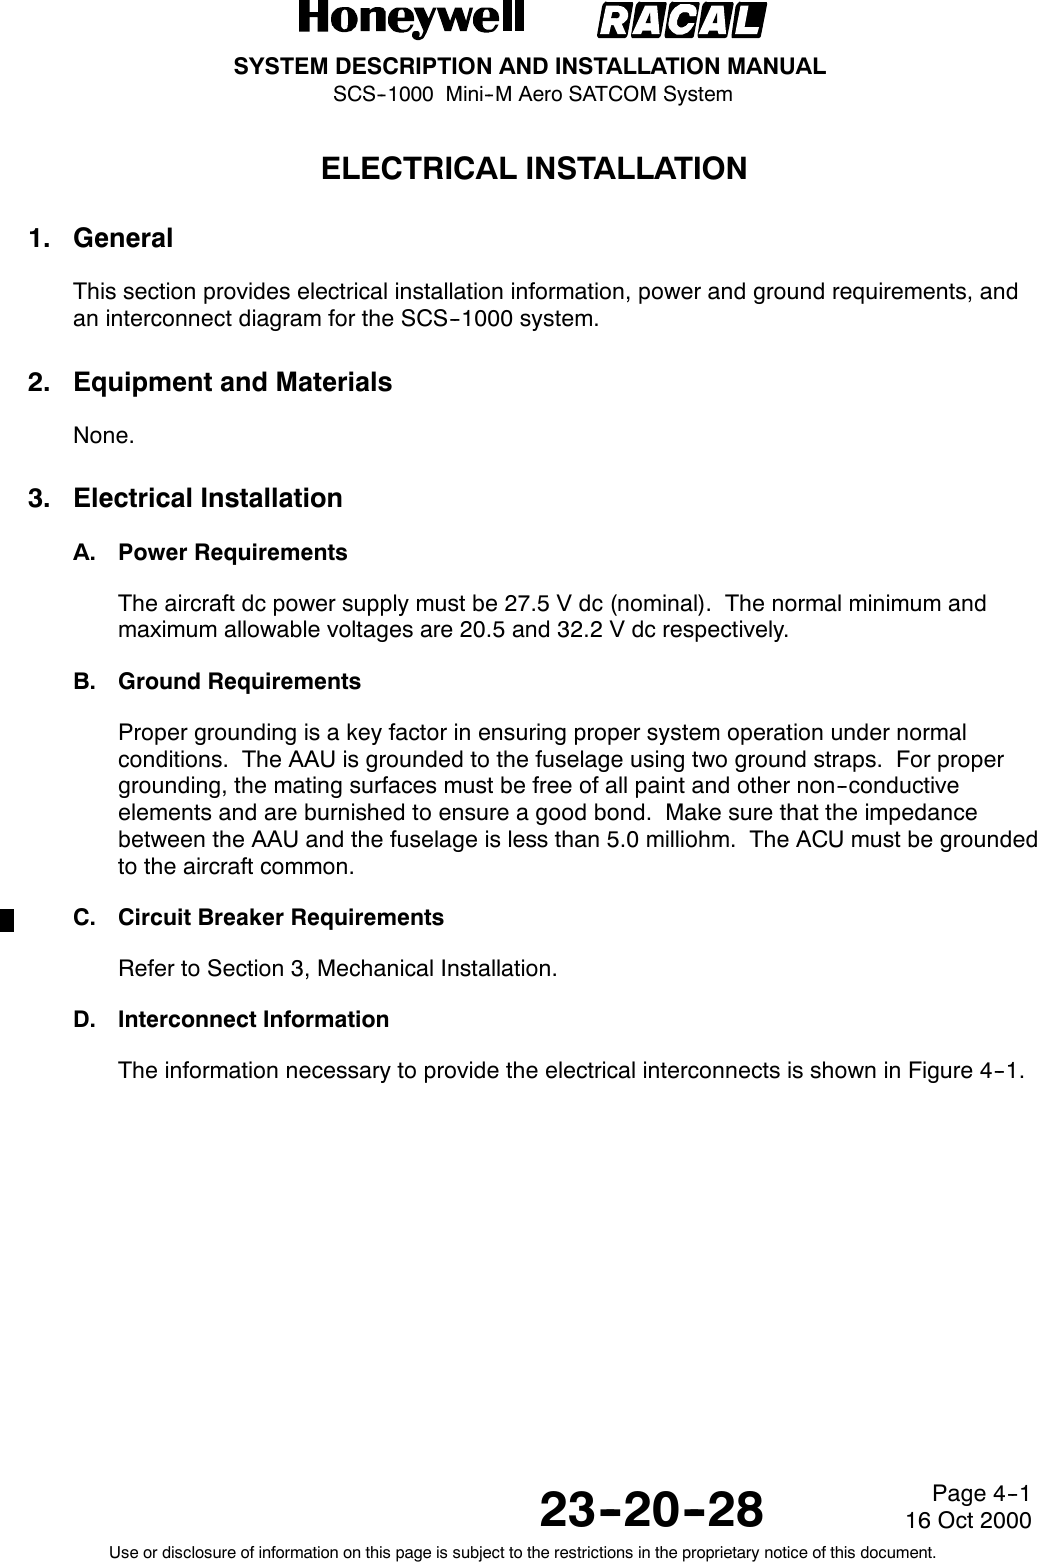 SYSTEM DESCRIPTION AND INSTALLATION MANUALSCS--1000 Mini--M Aero SATCOM System23--20--28Use or disclosure of information on this page is subject to the restrictions in the proprietary notice of this document.Page 4--116 Oct 2000ELECTRICAL INSTALLATION1. GeneralThis section provides electrical installation information, power and ground requirements, andan interconnect diagram for the SCS--1000 system.2. Equipment and MaterialsNone.3. Electrical InstallationA. Power RequirementsThe aircraft dc power supply must be 27.5 V dc (nominal). The normal minimum andmaximum allowable voltages are 20.5 and 32.2 V dc respectively.B. Ground RequirementsProper grounding is a key factor in ensuring proper system operation under normalconditions. The AAU is grounded to the fuselage using two ground straps. For propergrounding, the mating surfaces must be free of all paint and other non--conductiveelements and are burnished to ensure a good bond. Make sure that the impedancebetween the AAU and the fuselage is less than 5.0 milliohm. The ACU must be groundedto the aircraft common.C. Circuit Breaker RequirementsRefer to Section 3, Mechanical Installation.D. Interconnect InformationThe information necessary to provide the electrical interconnects is shown in Figure 4--1.